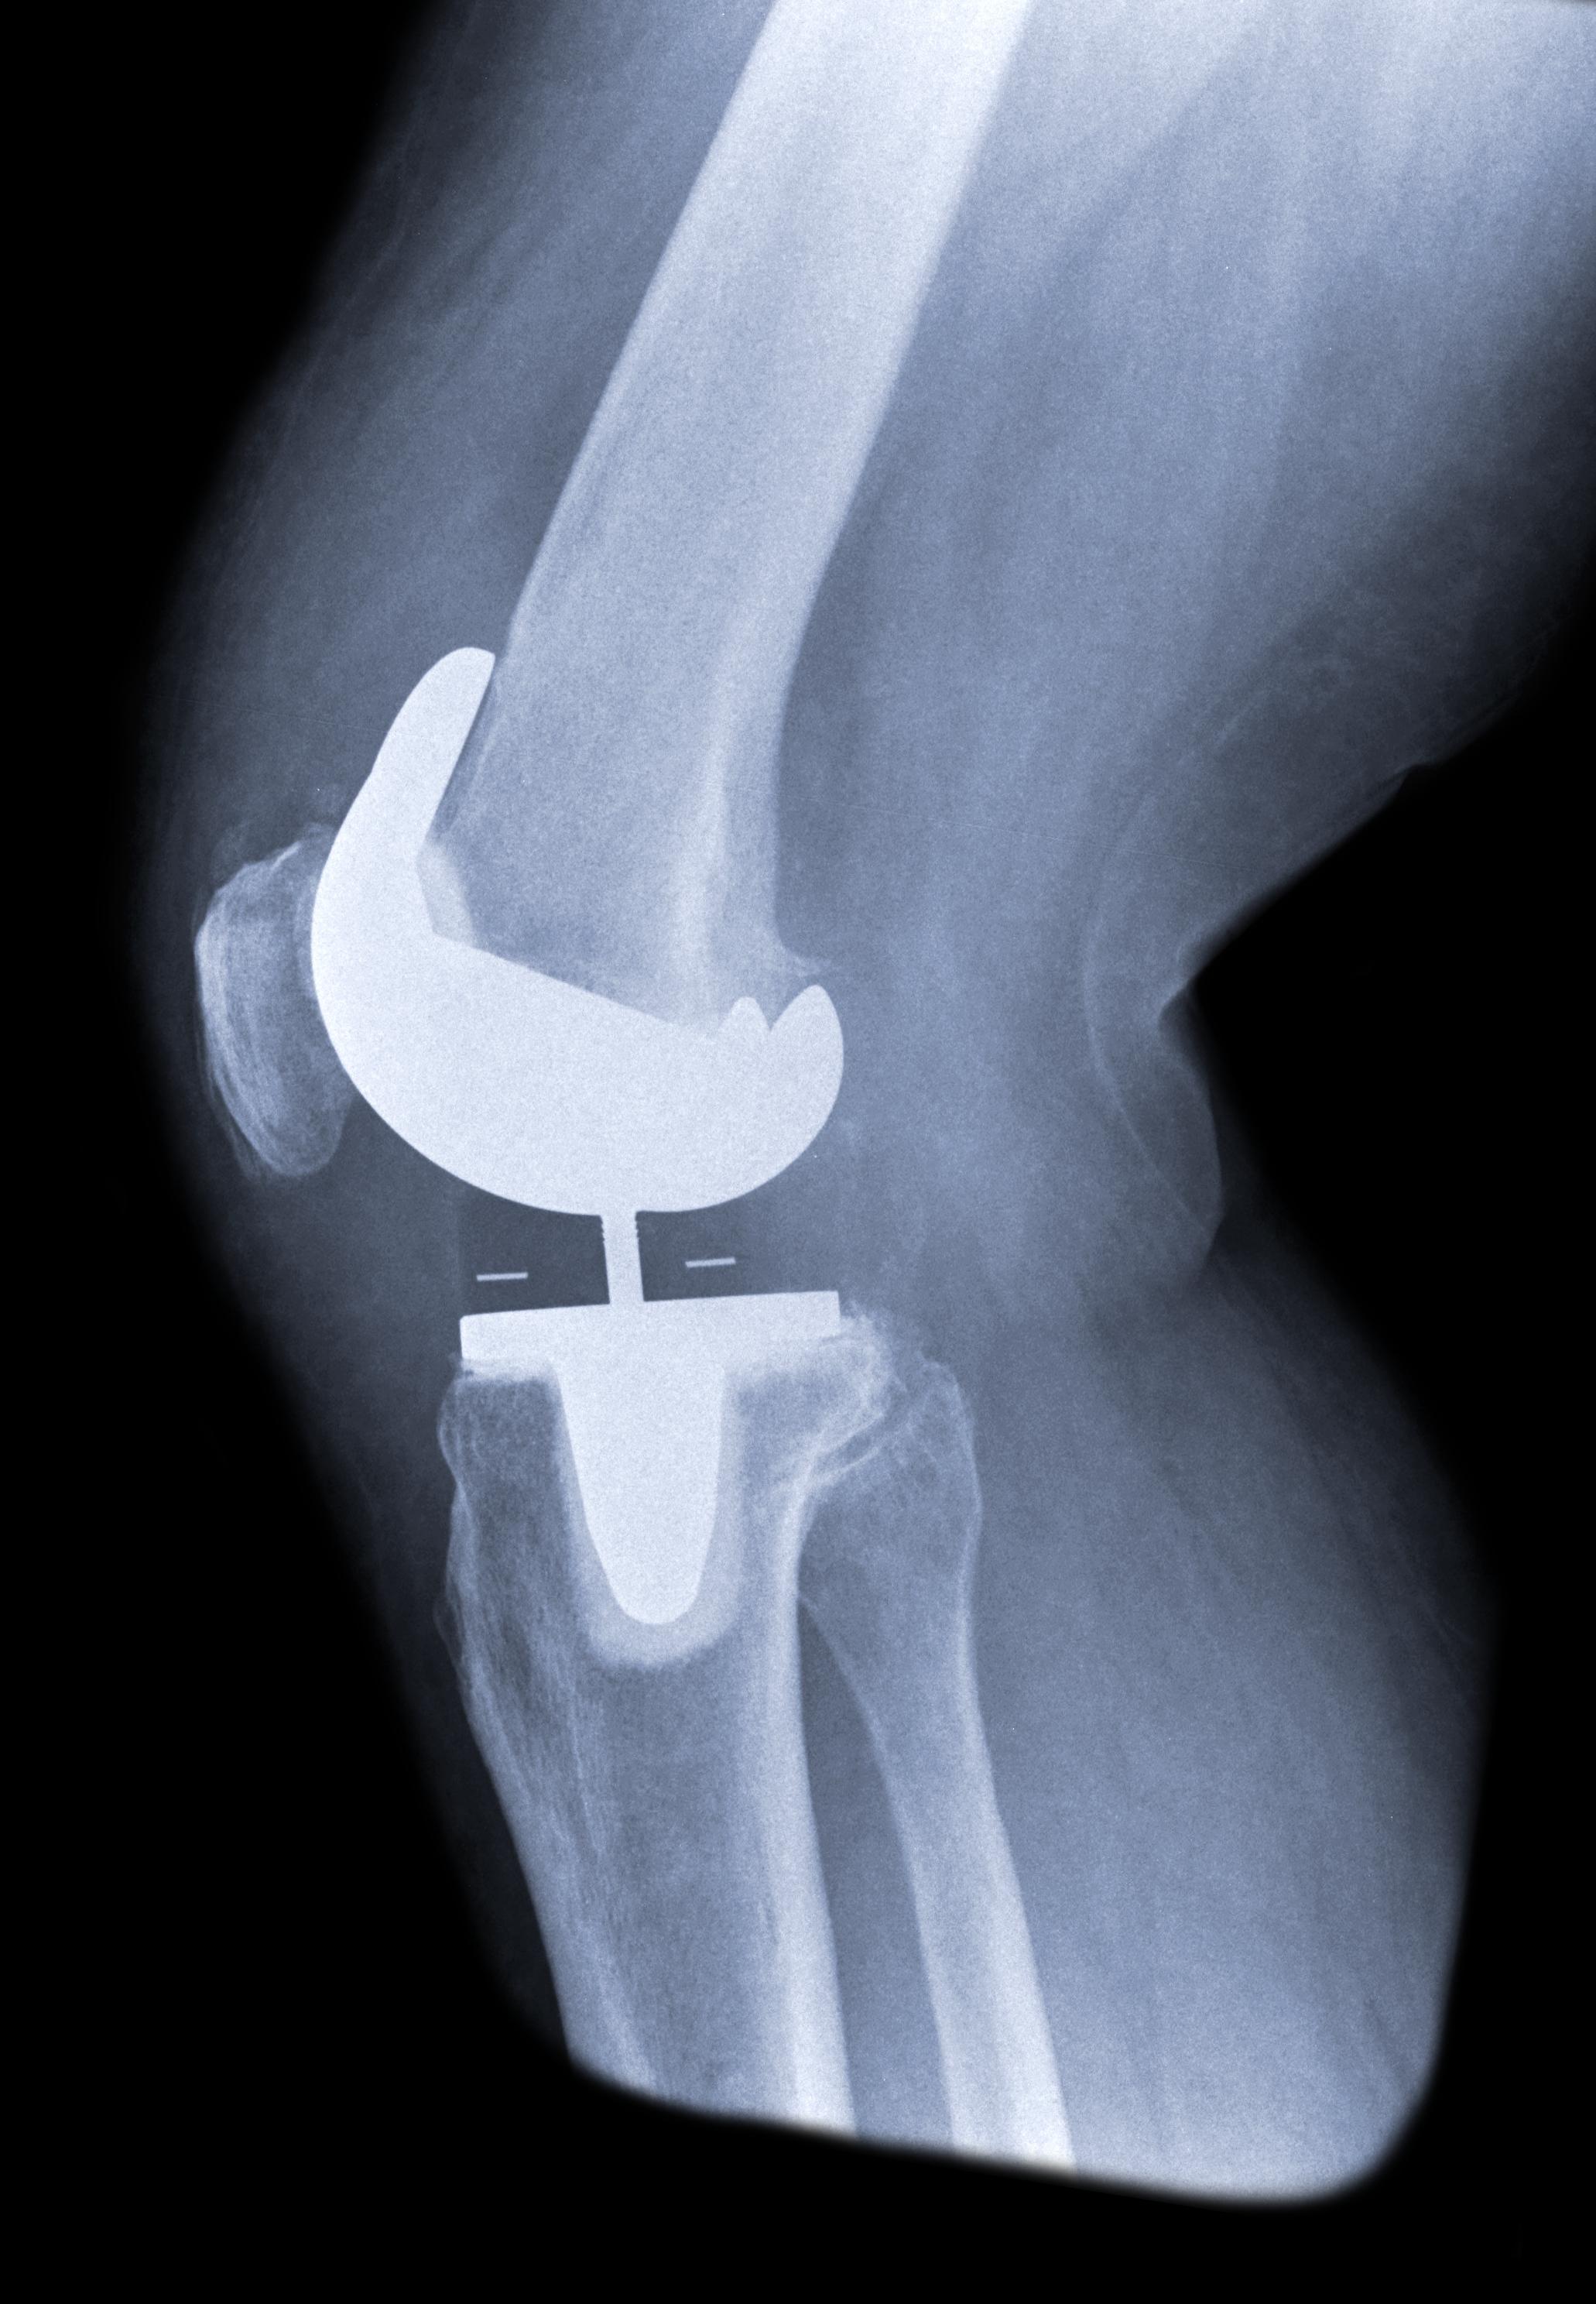 Same-day knee replacement surgery - Mayo Clinic Health System